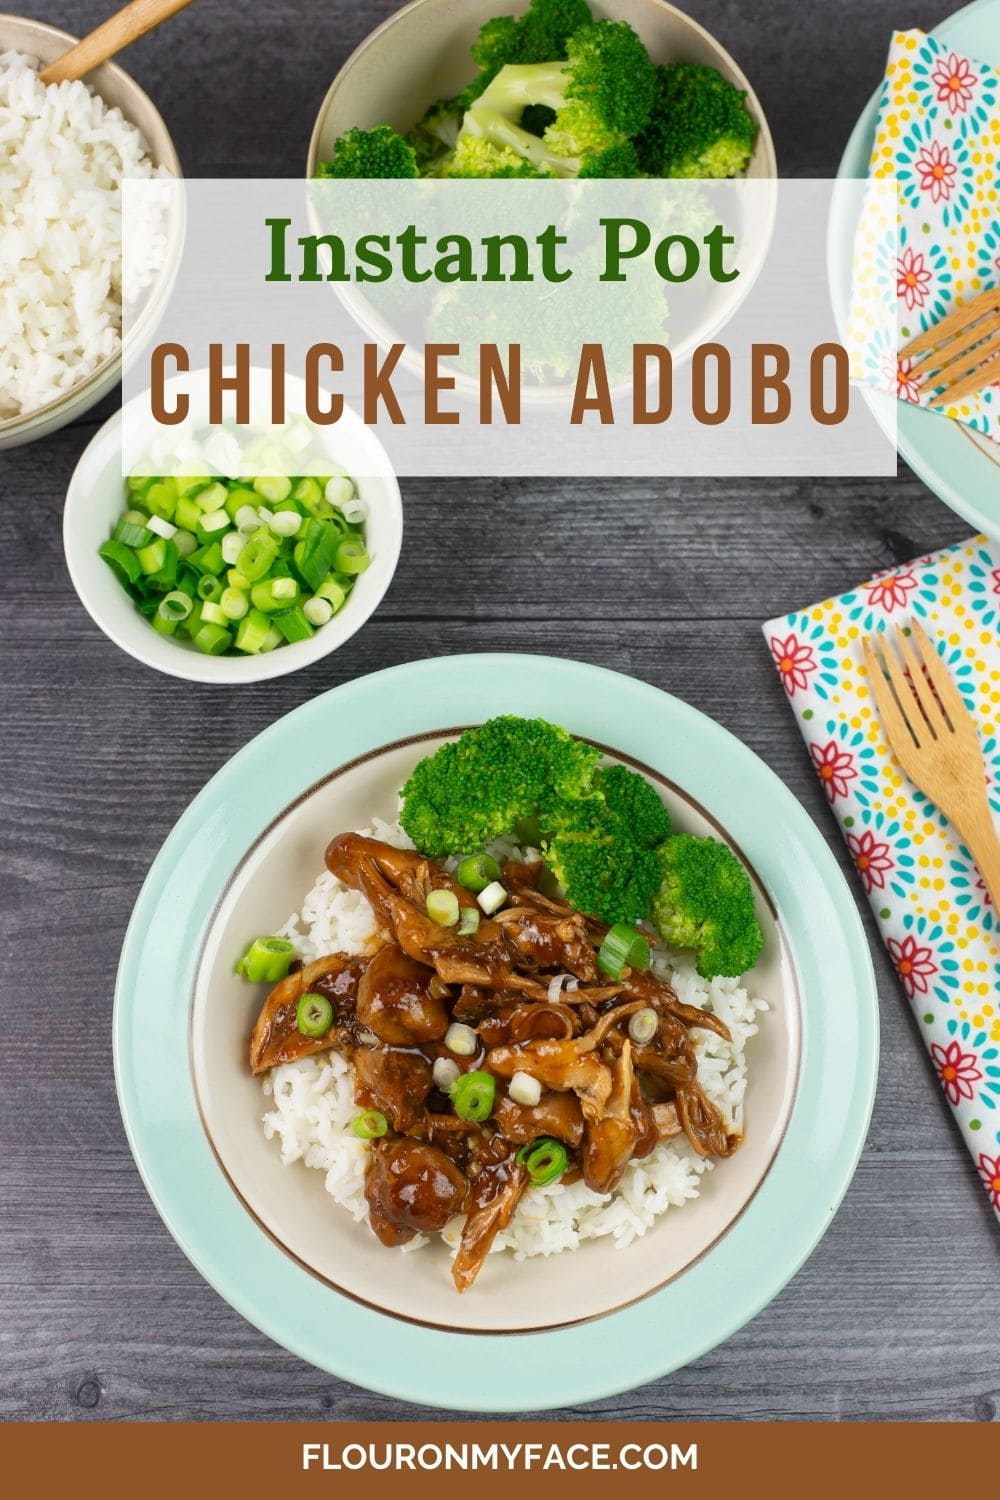 Instant Pot Chicken Adobo serving with rie and broccoli.